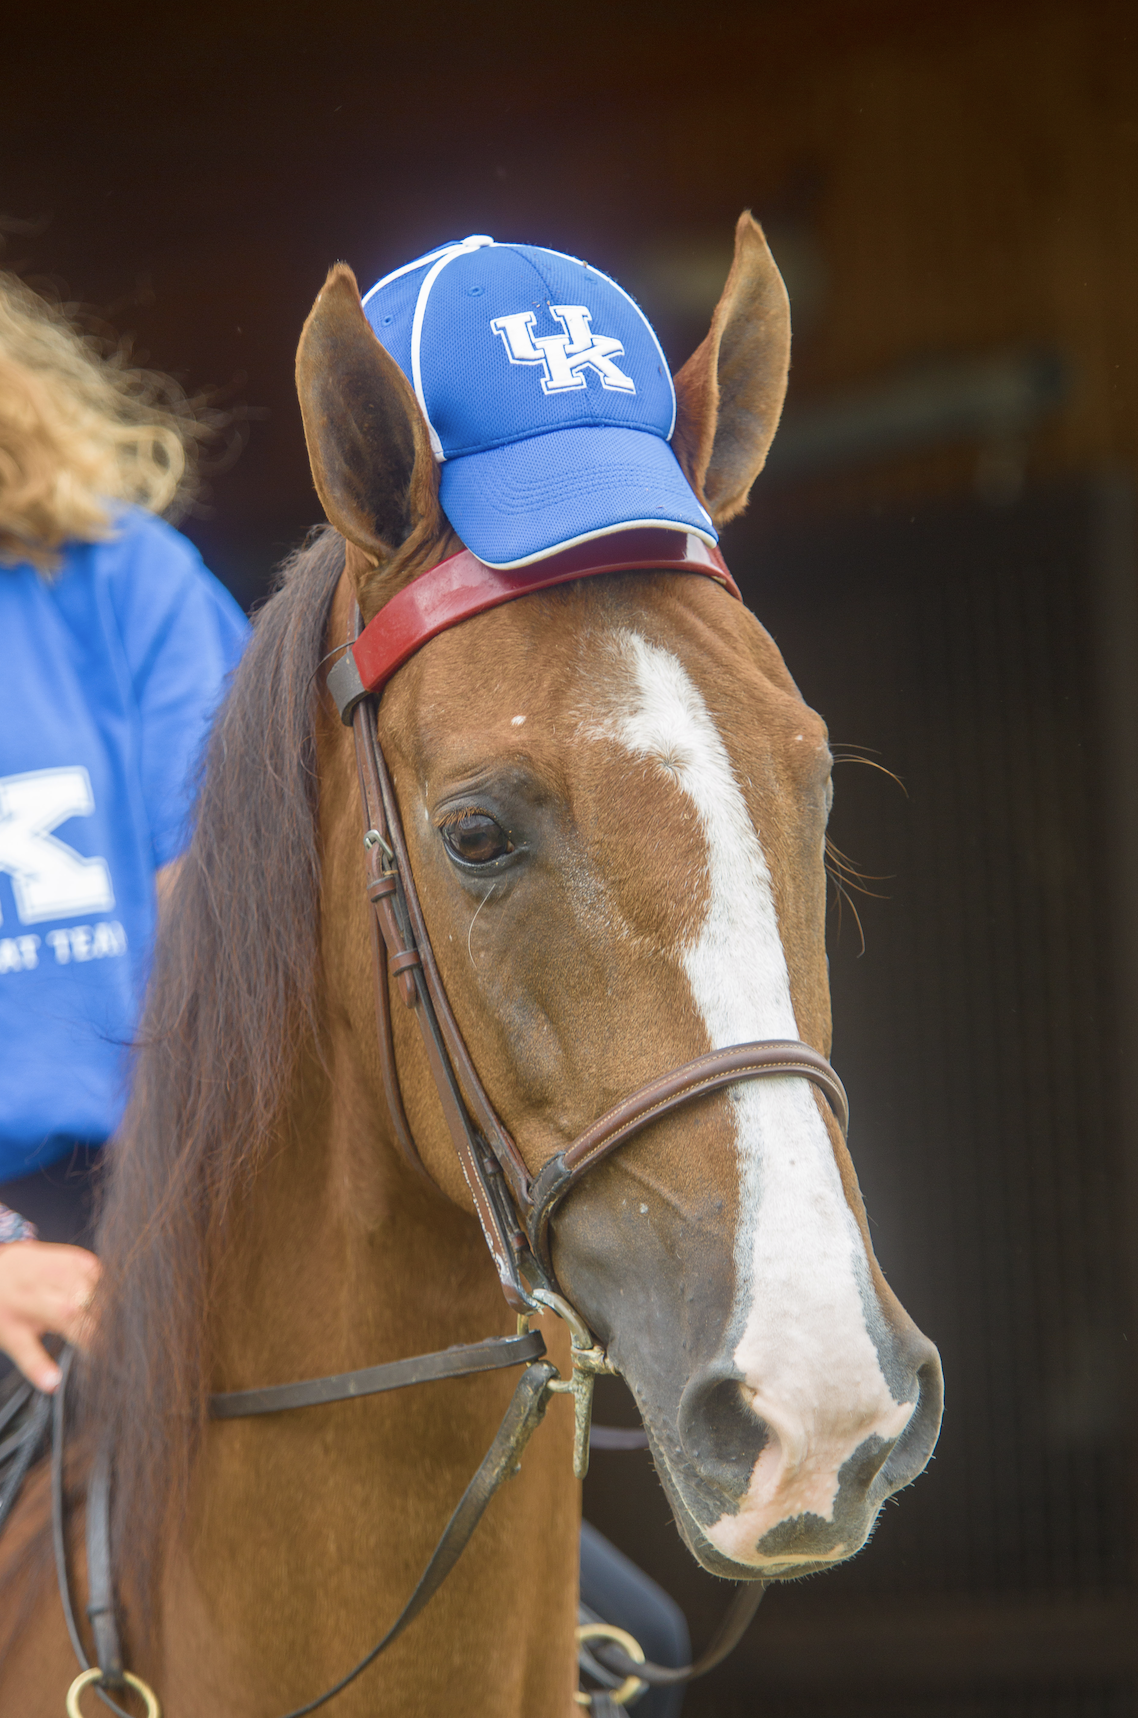 Horse with a blue UK hat